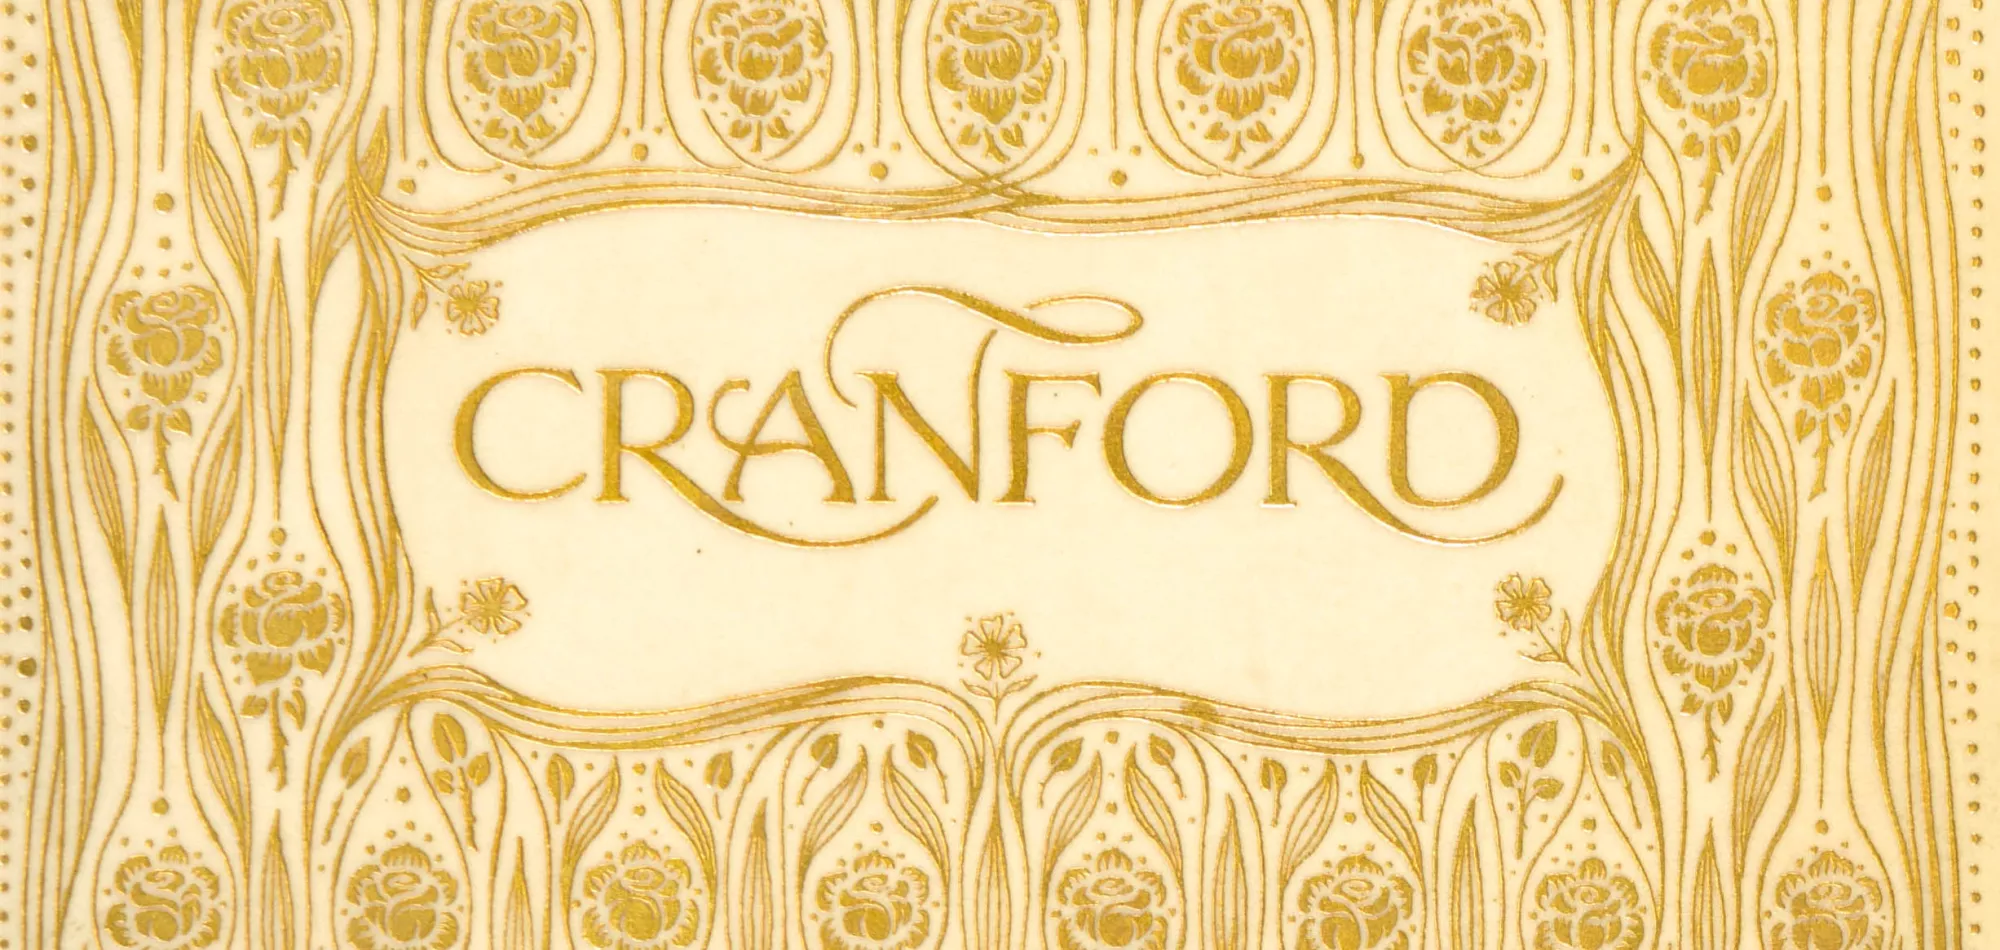 Cranford front cover